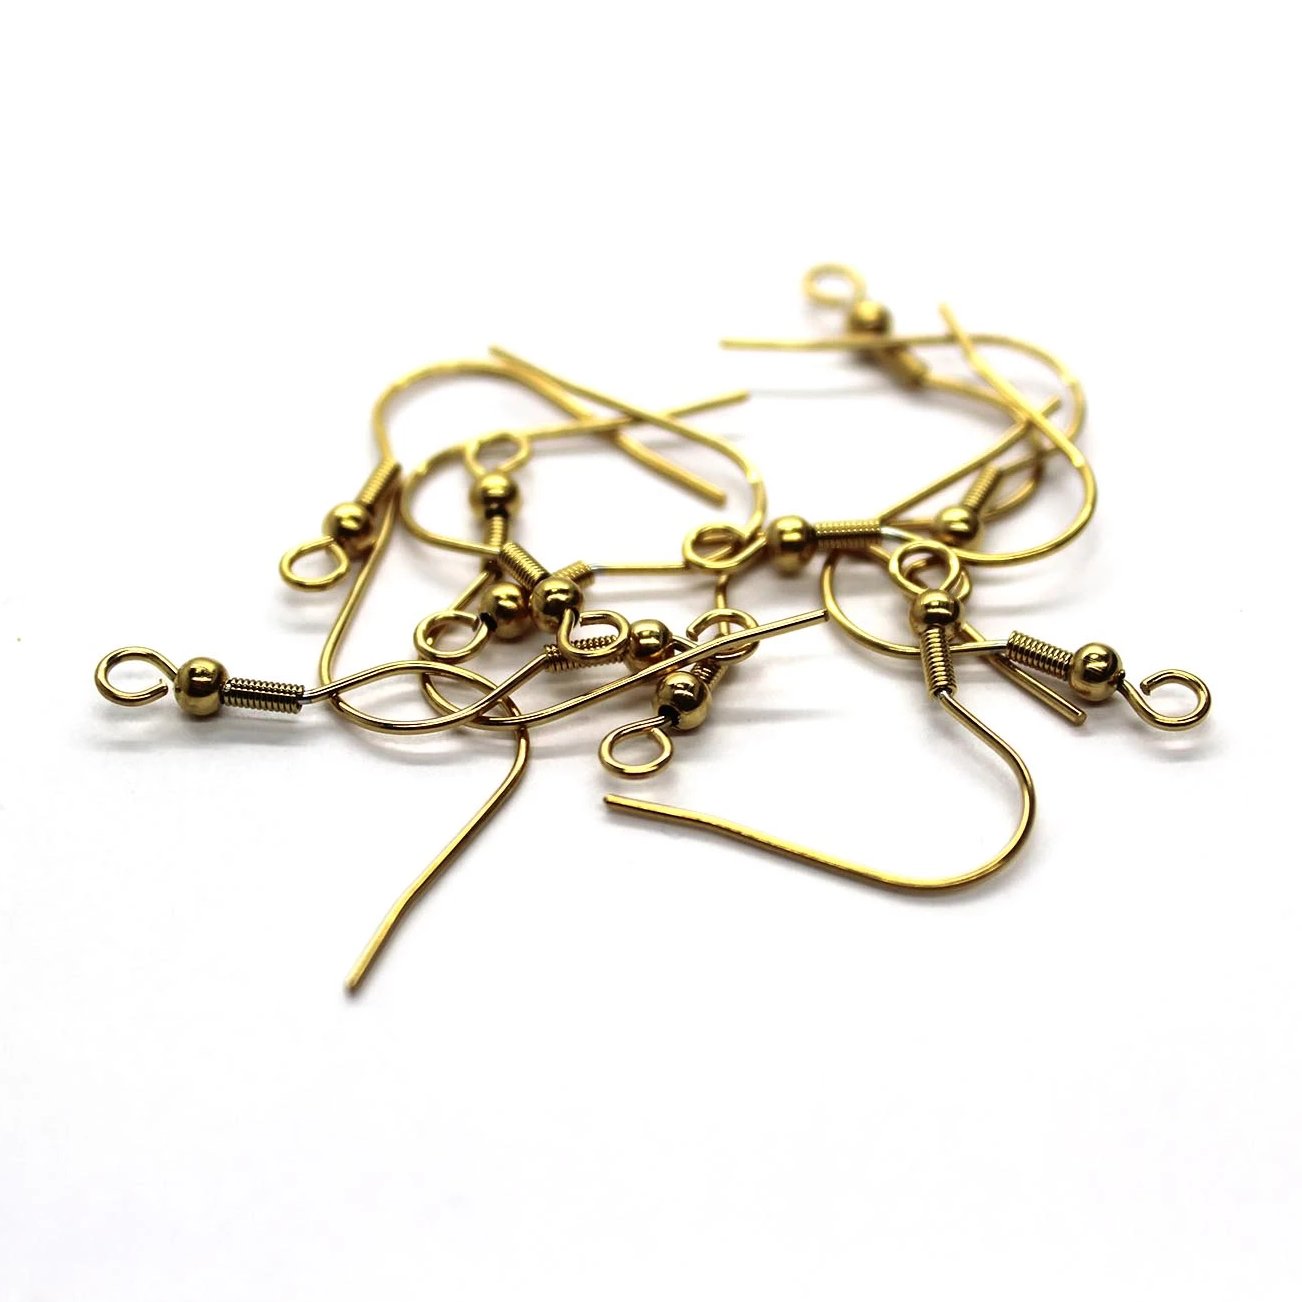 Earrings, Gold-Plated, Stainless Steel, Shepherd Hook with Ball, 19mm x 11mm, Sold Per pkg of 4 pairs